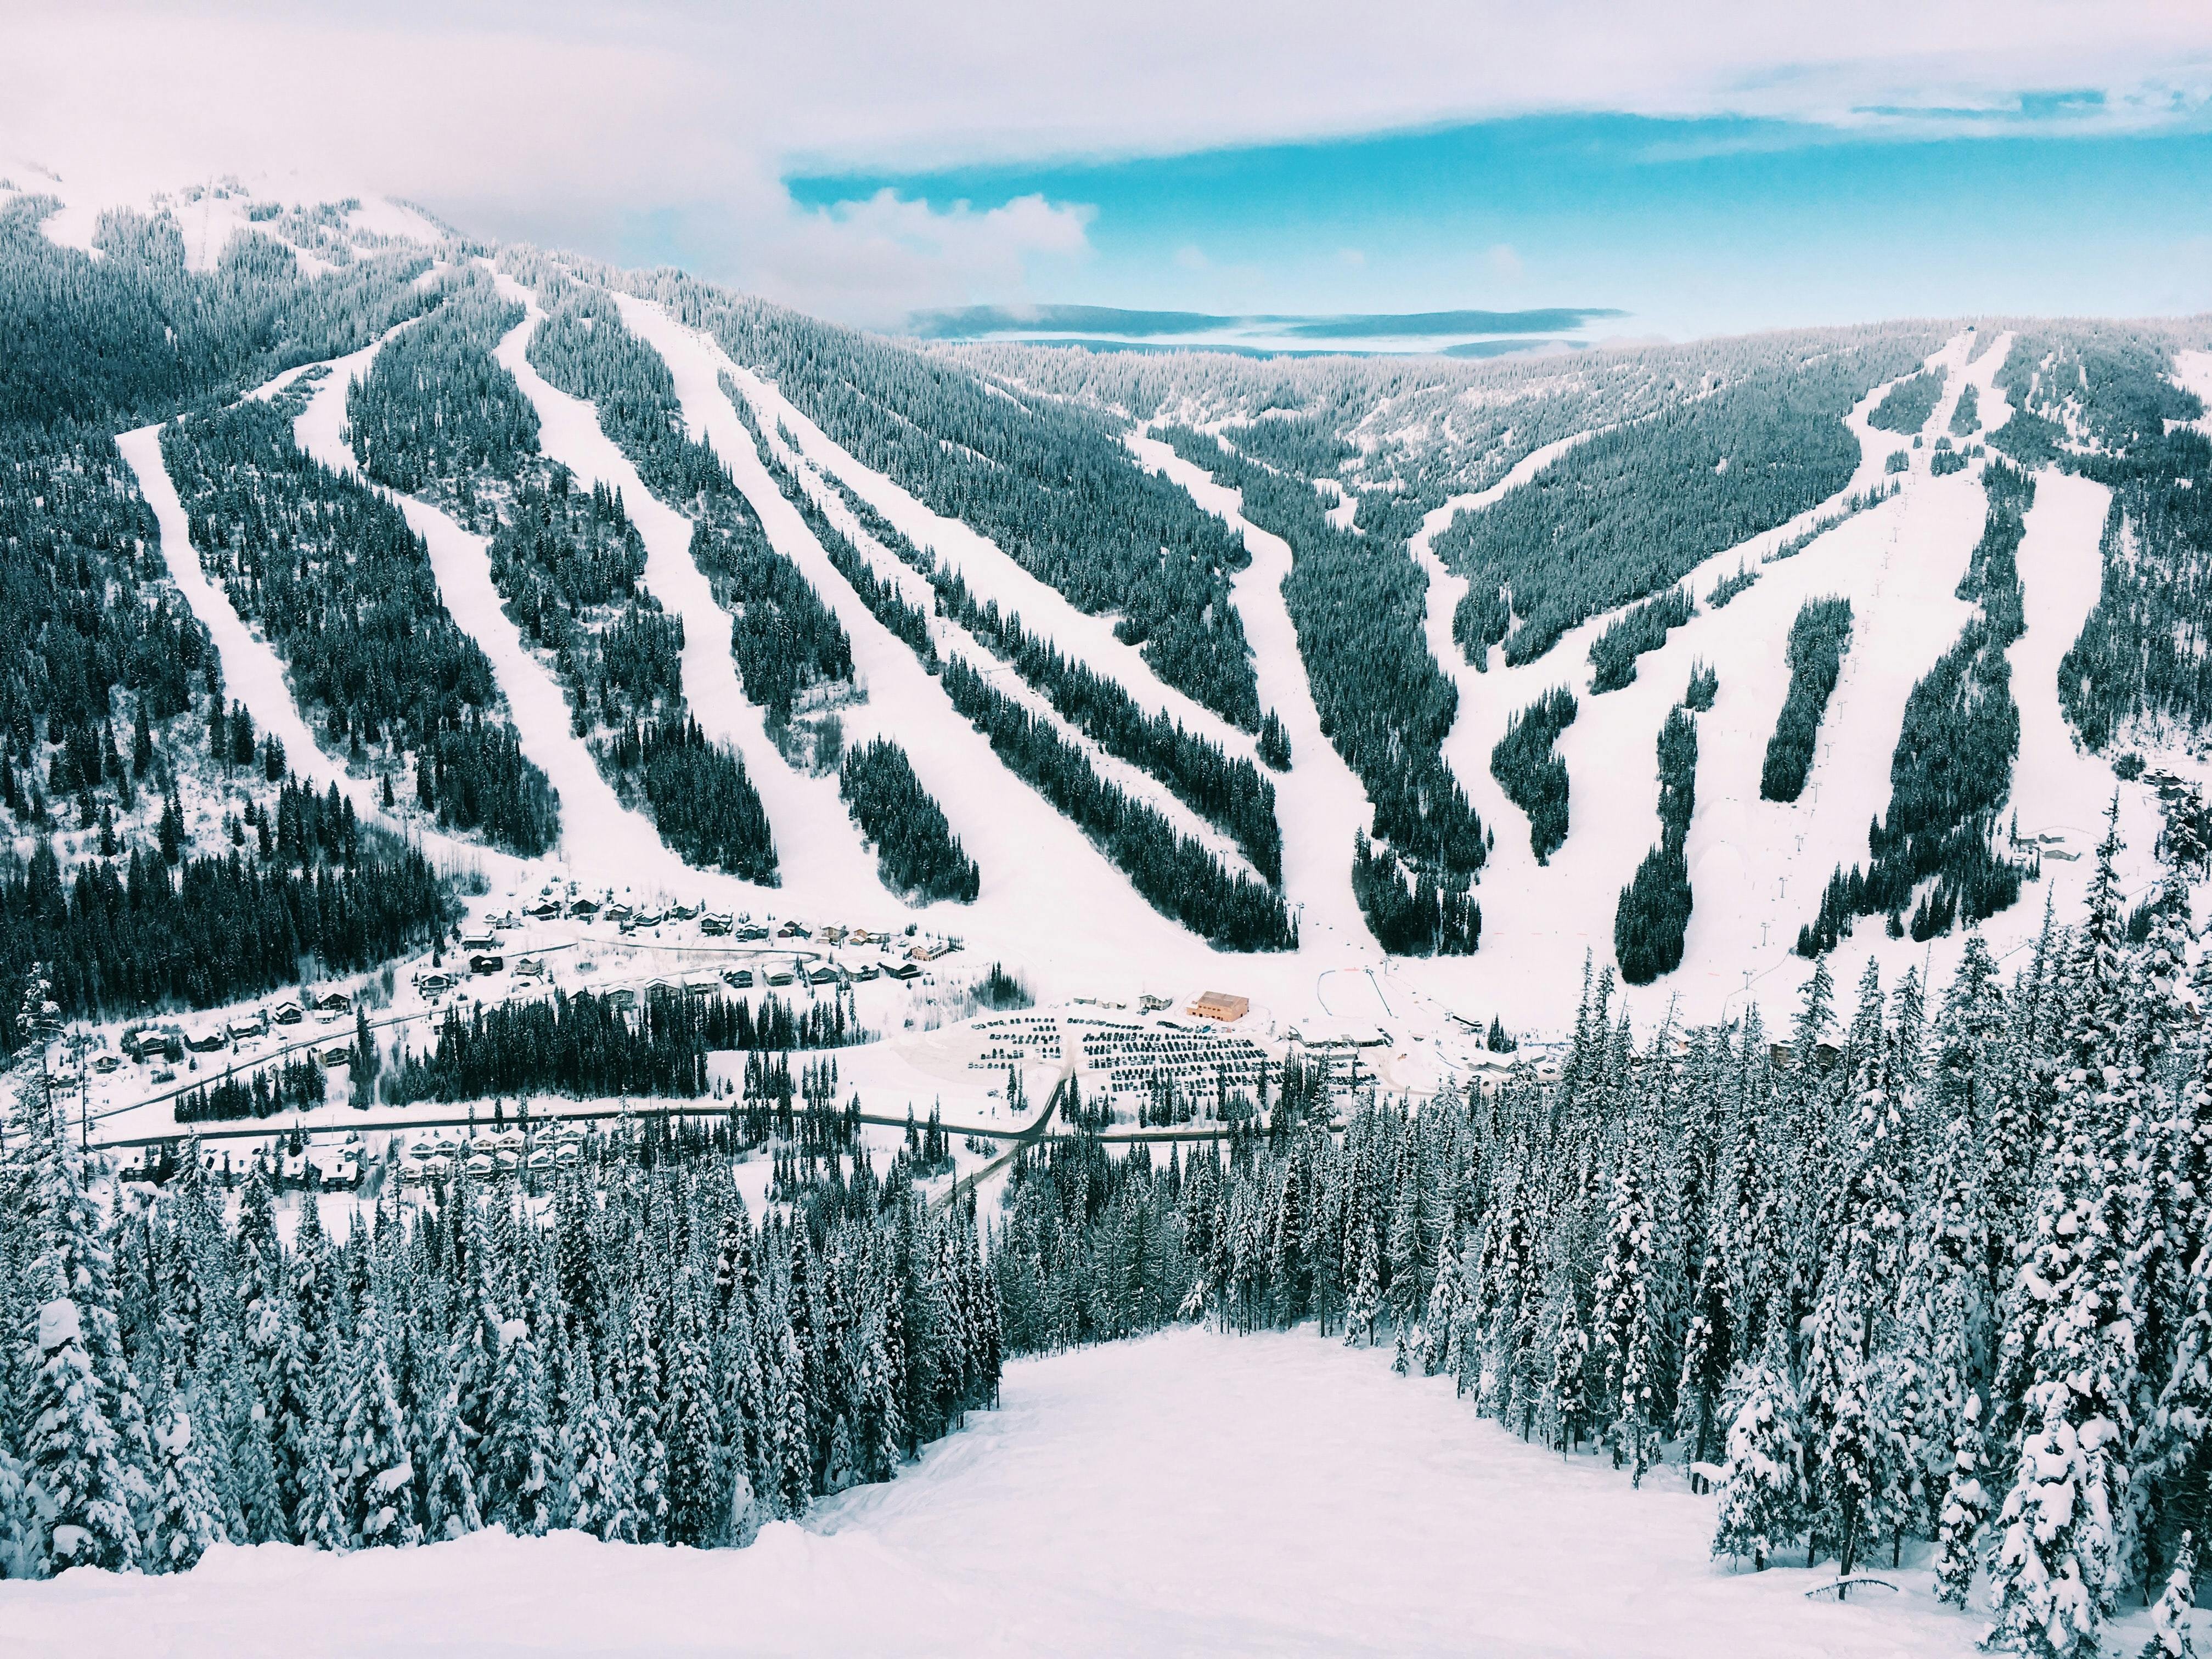 A photo looking down at a ski resort from the slopes. 